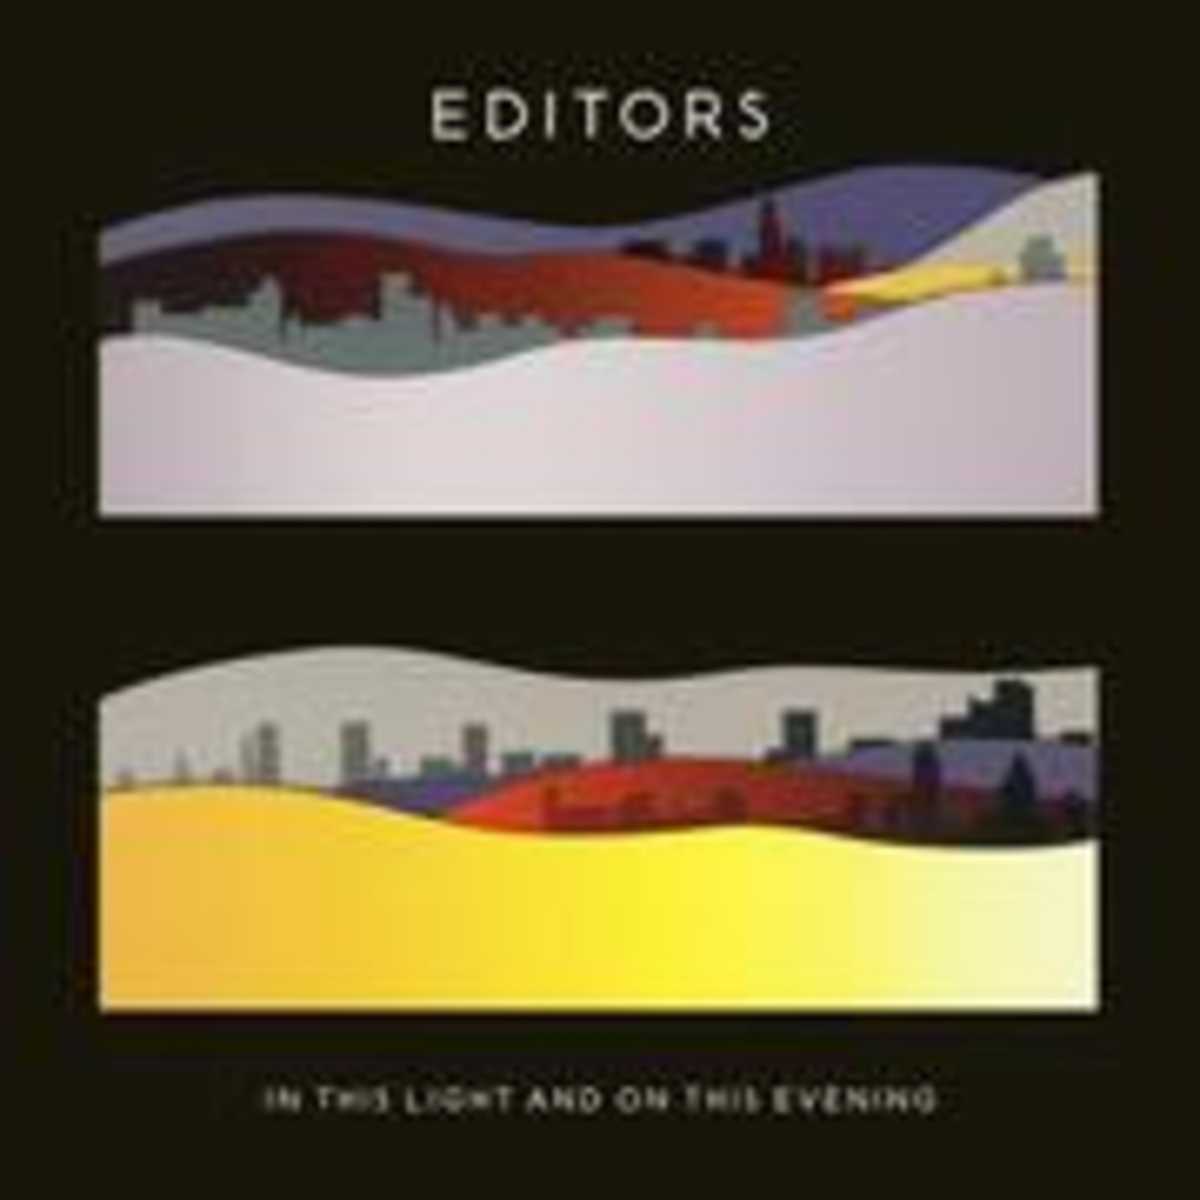 The Editors - In this Light and on this Evening